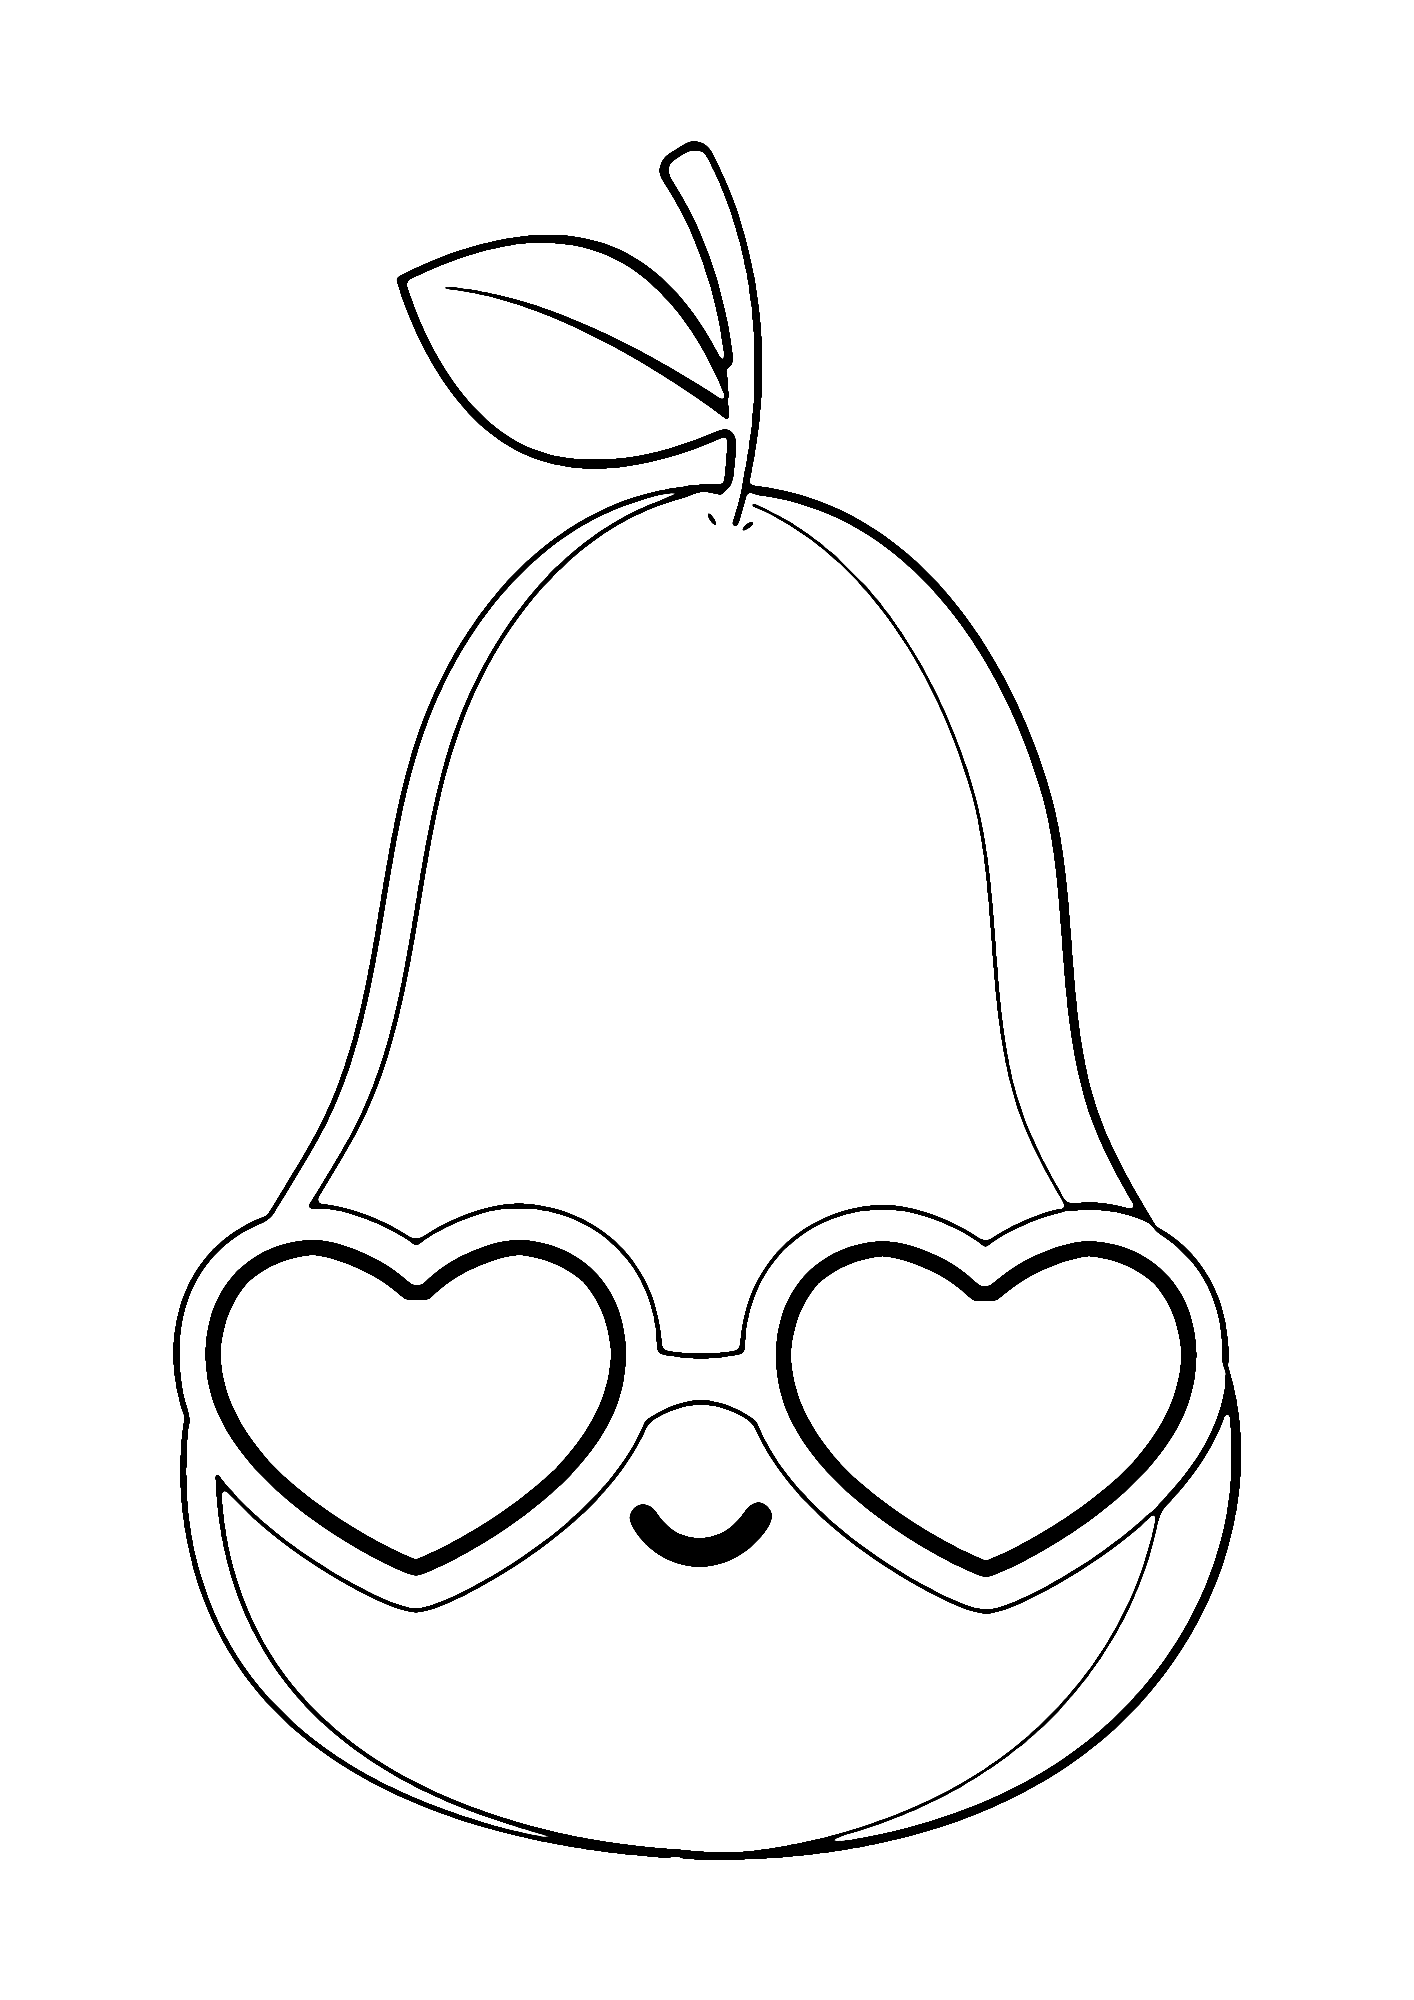 Pear Painting For Kids Coloring Pages